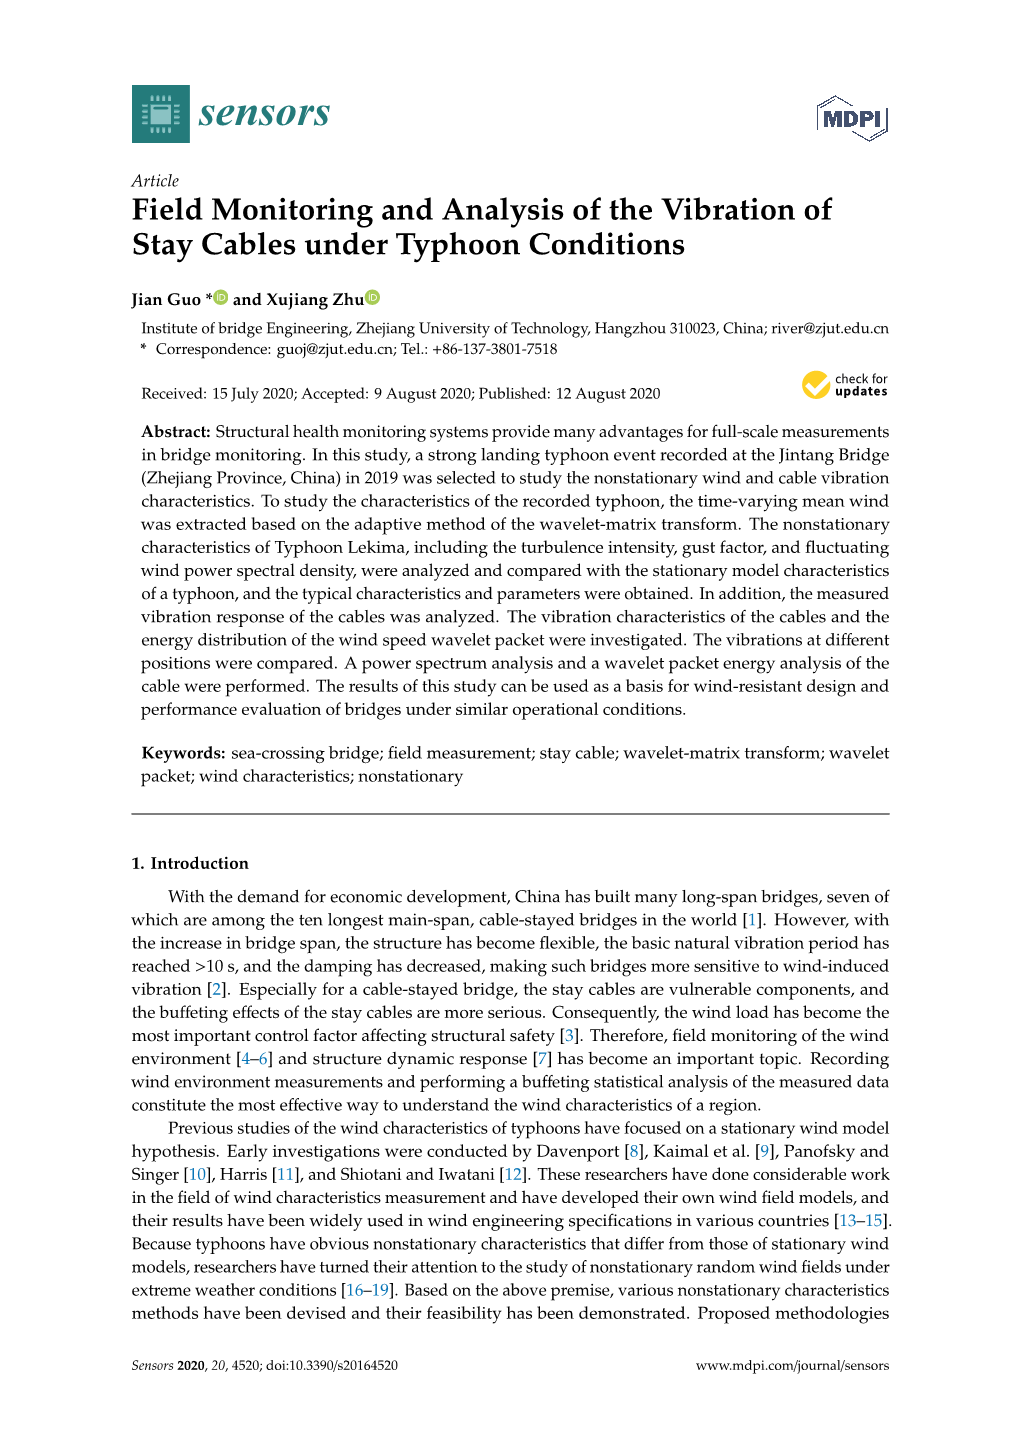 Field Monitoring and Analysis of the Vibration of Stay Cables Under Typhoon Conditions